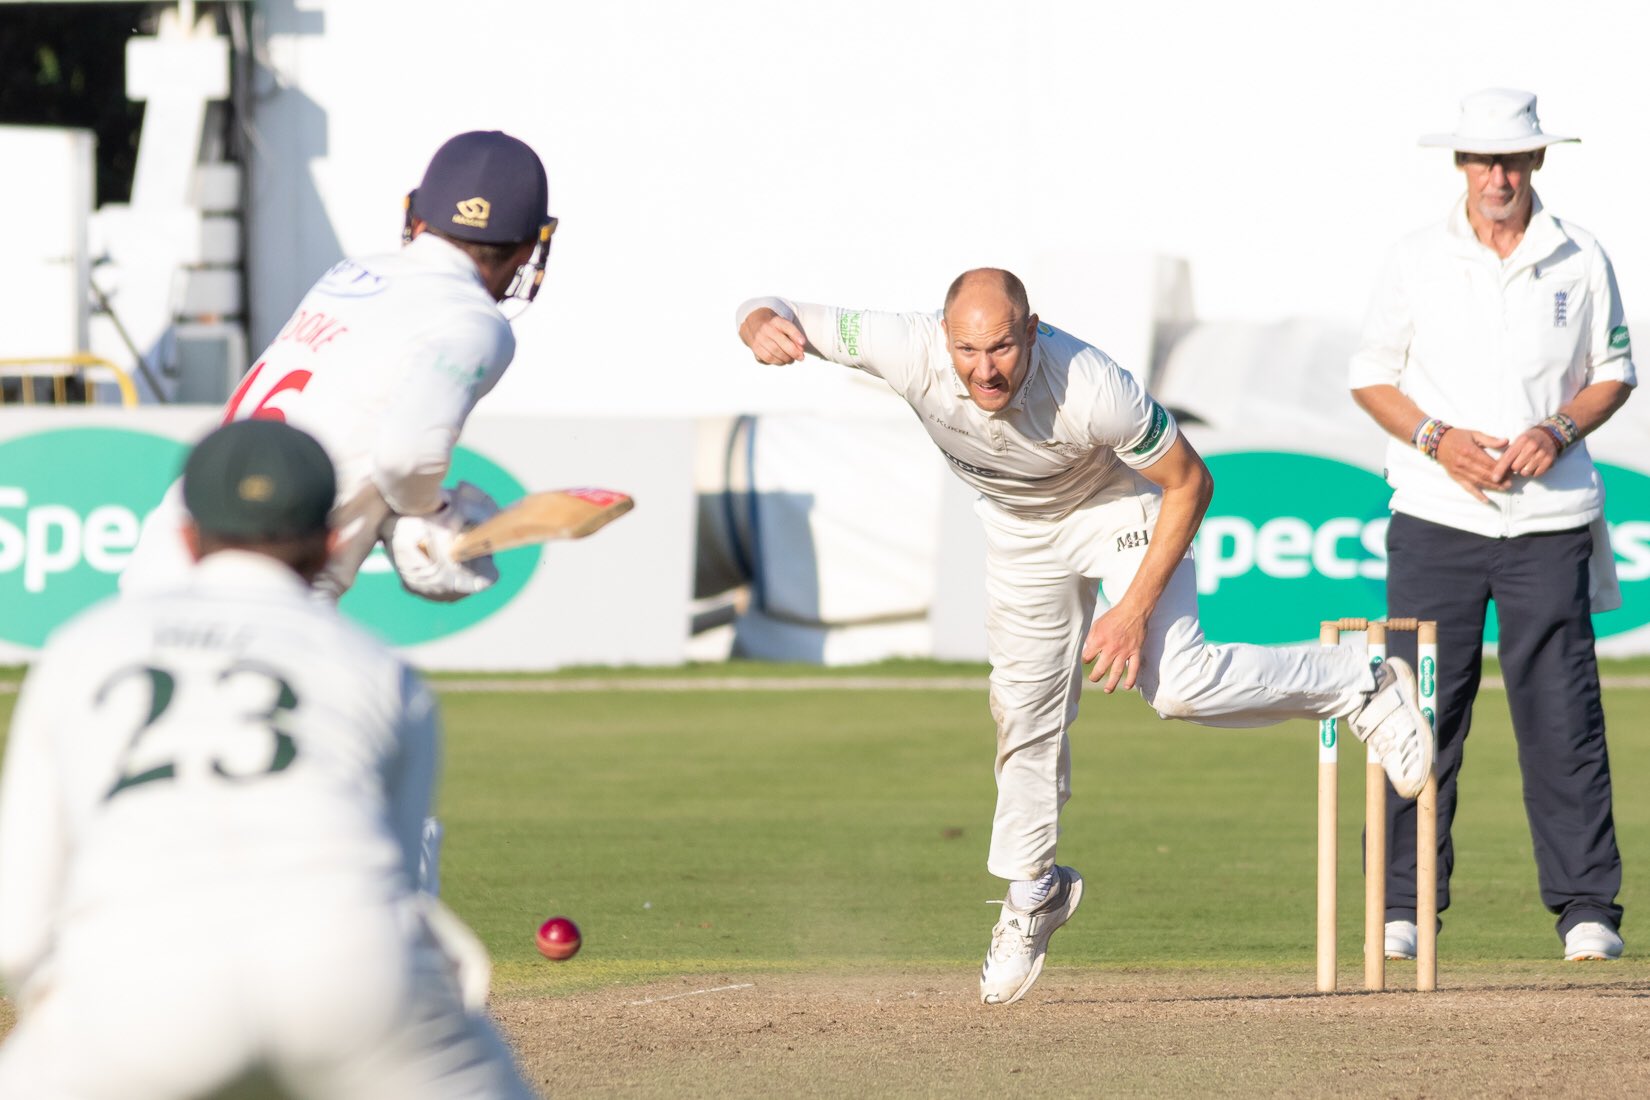 VIDEO | Leicestershire slapped with five-run penalty after Dieter Klein’s wild throw clobbers batsman